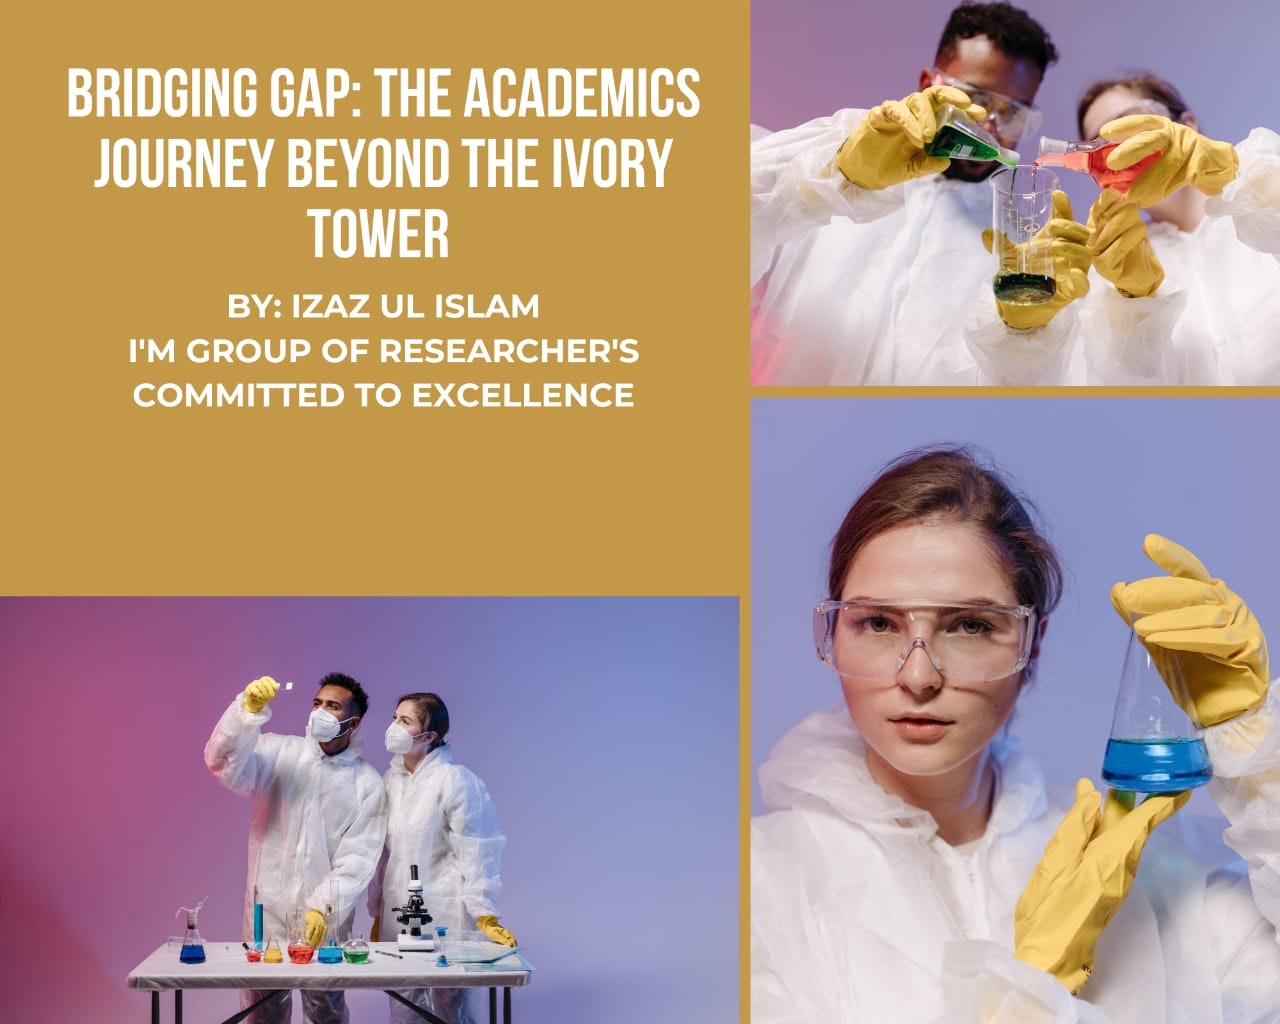 Bridging the Gap: The Academics Journey Beyond the Ivory Tower